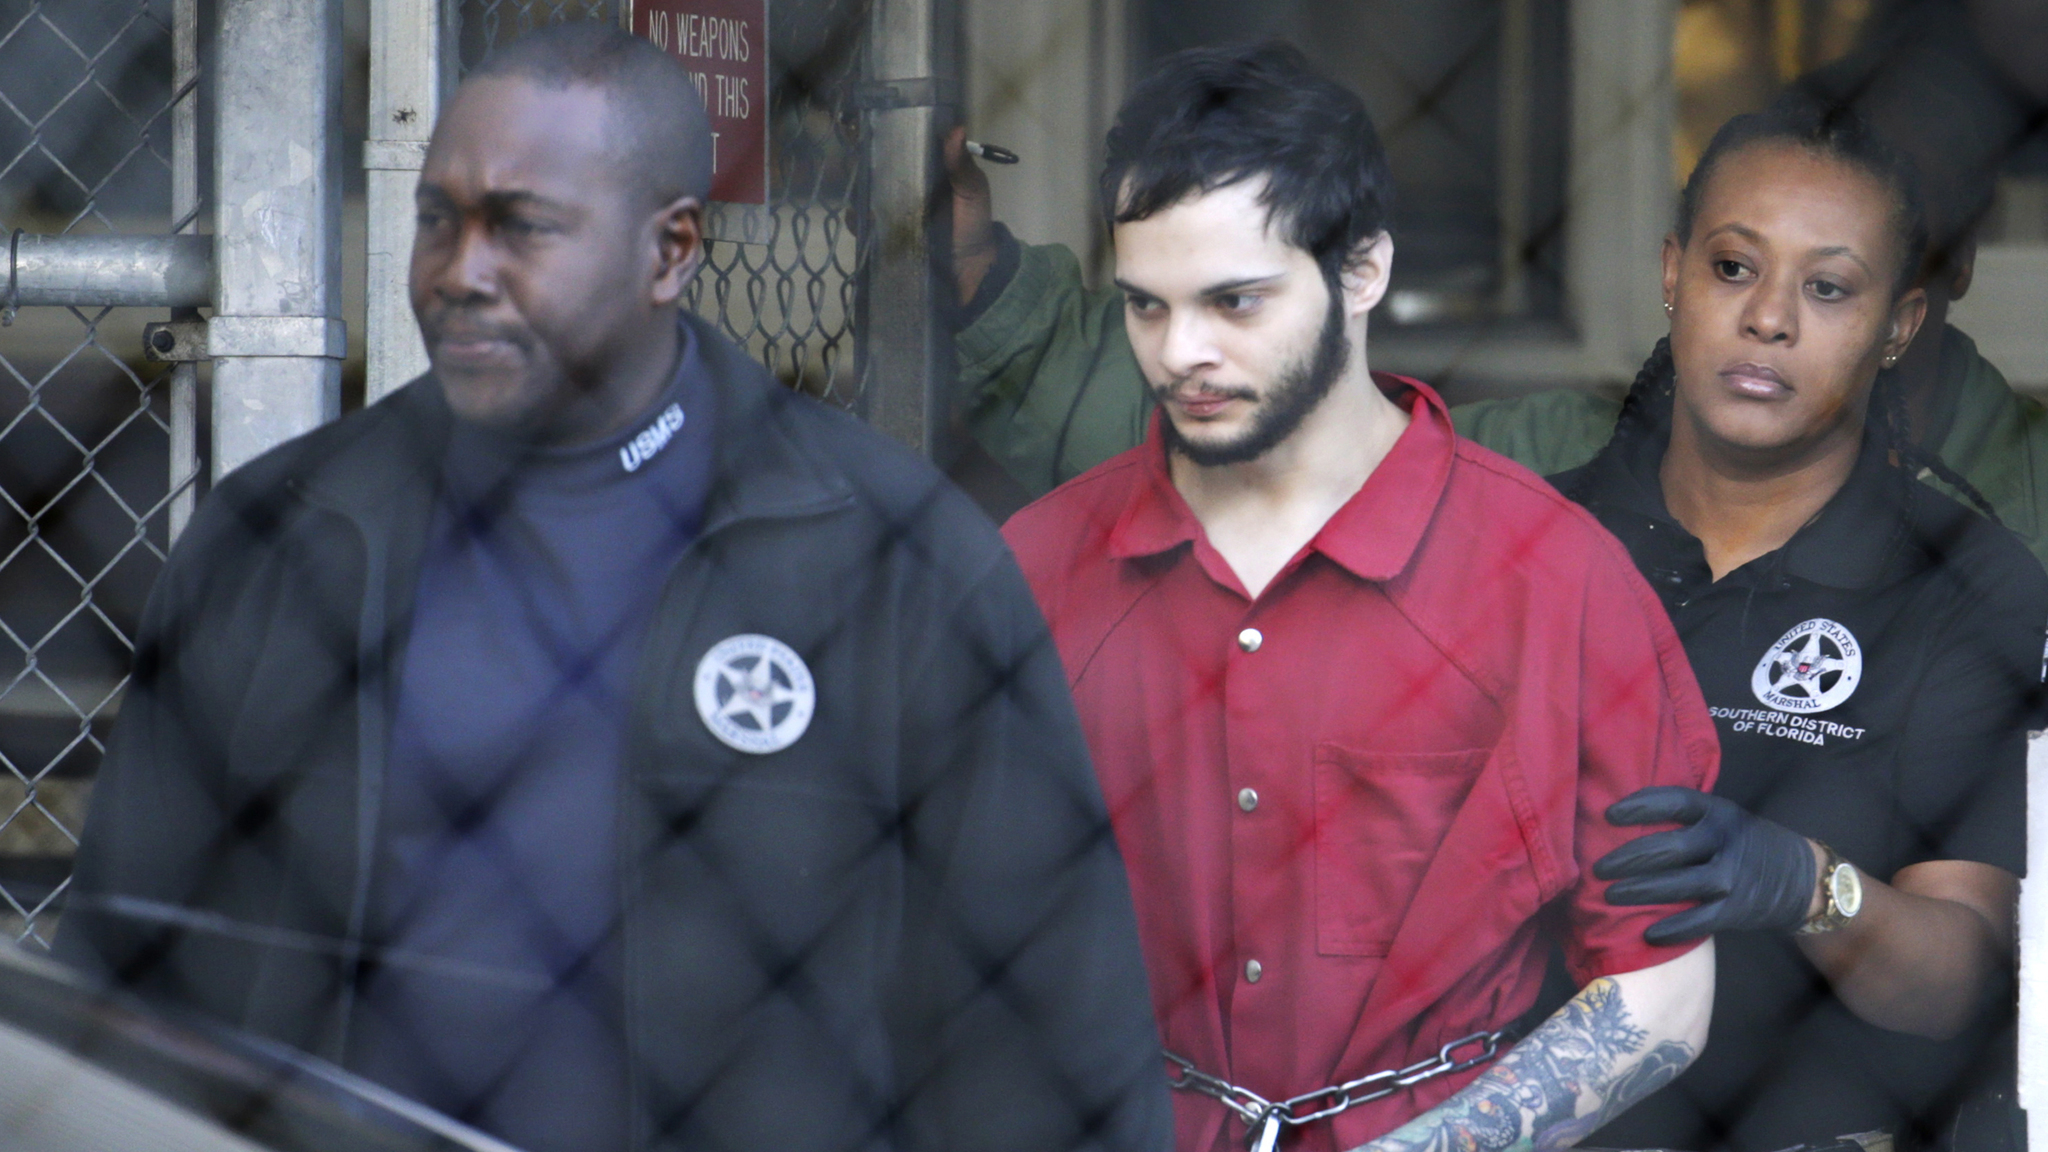 Esteban Santiago, center, is led from the Broward County jail for an arraignment in federal court, Monday, Jan. 30, 2017, in Fort Lauderdale, Fla. Santiago is charged in a 22-count federal indictment in the Jan. 6 shooting at the Fort Lauderdale-Hollywood International Airport. (Lynne Sladky | The Associated Press)